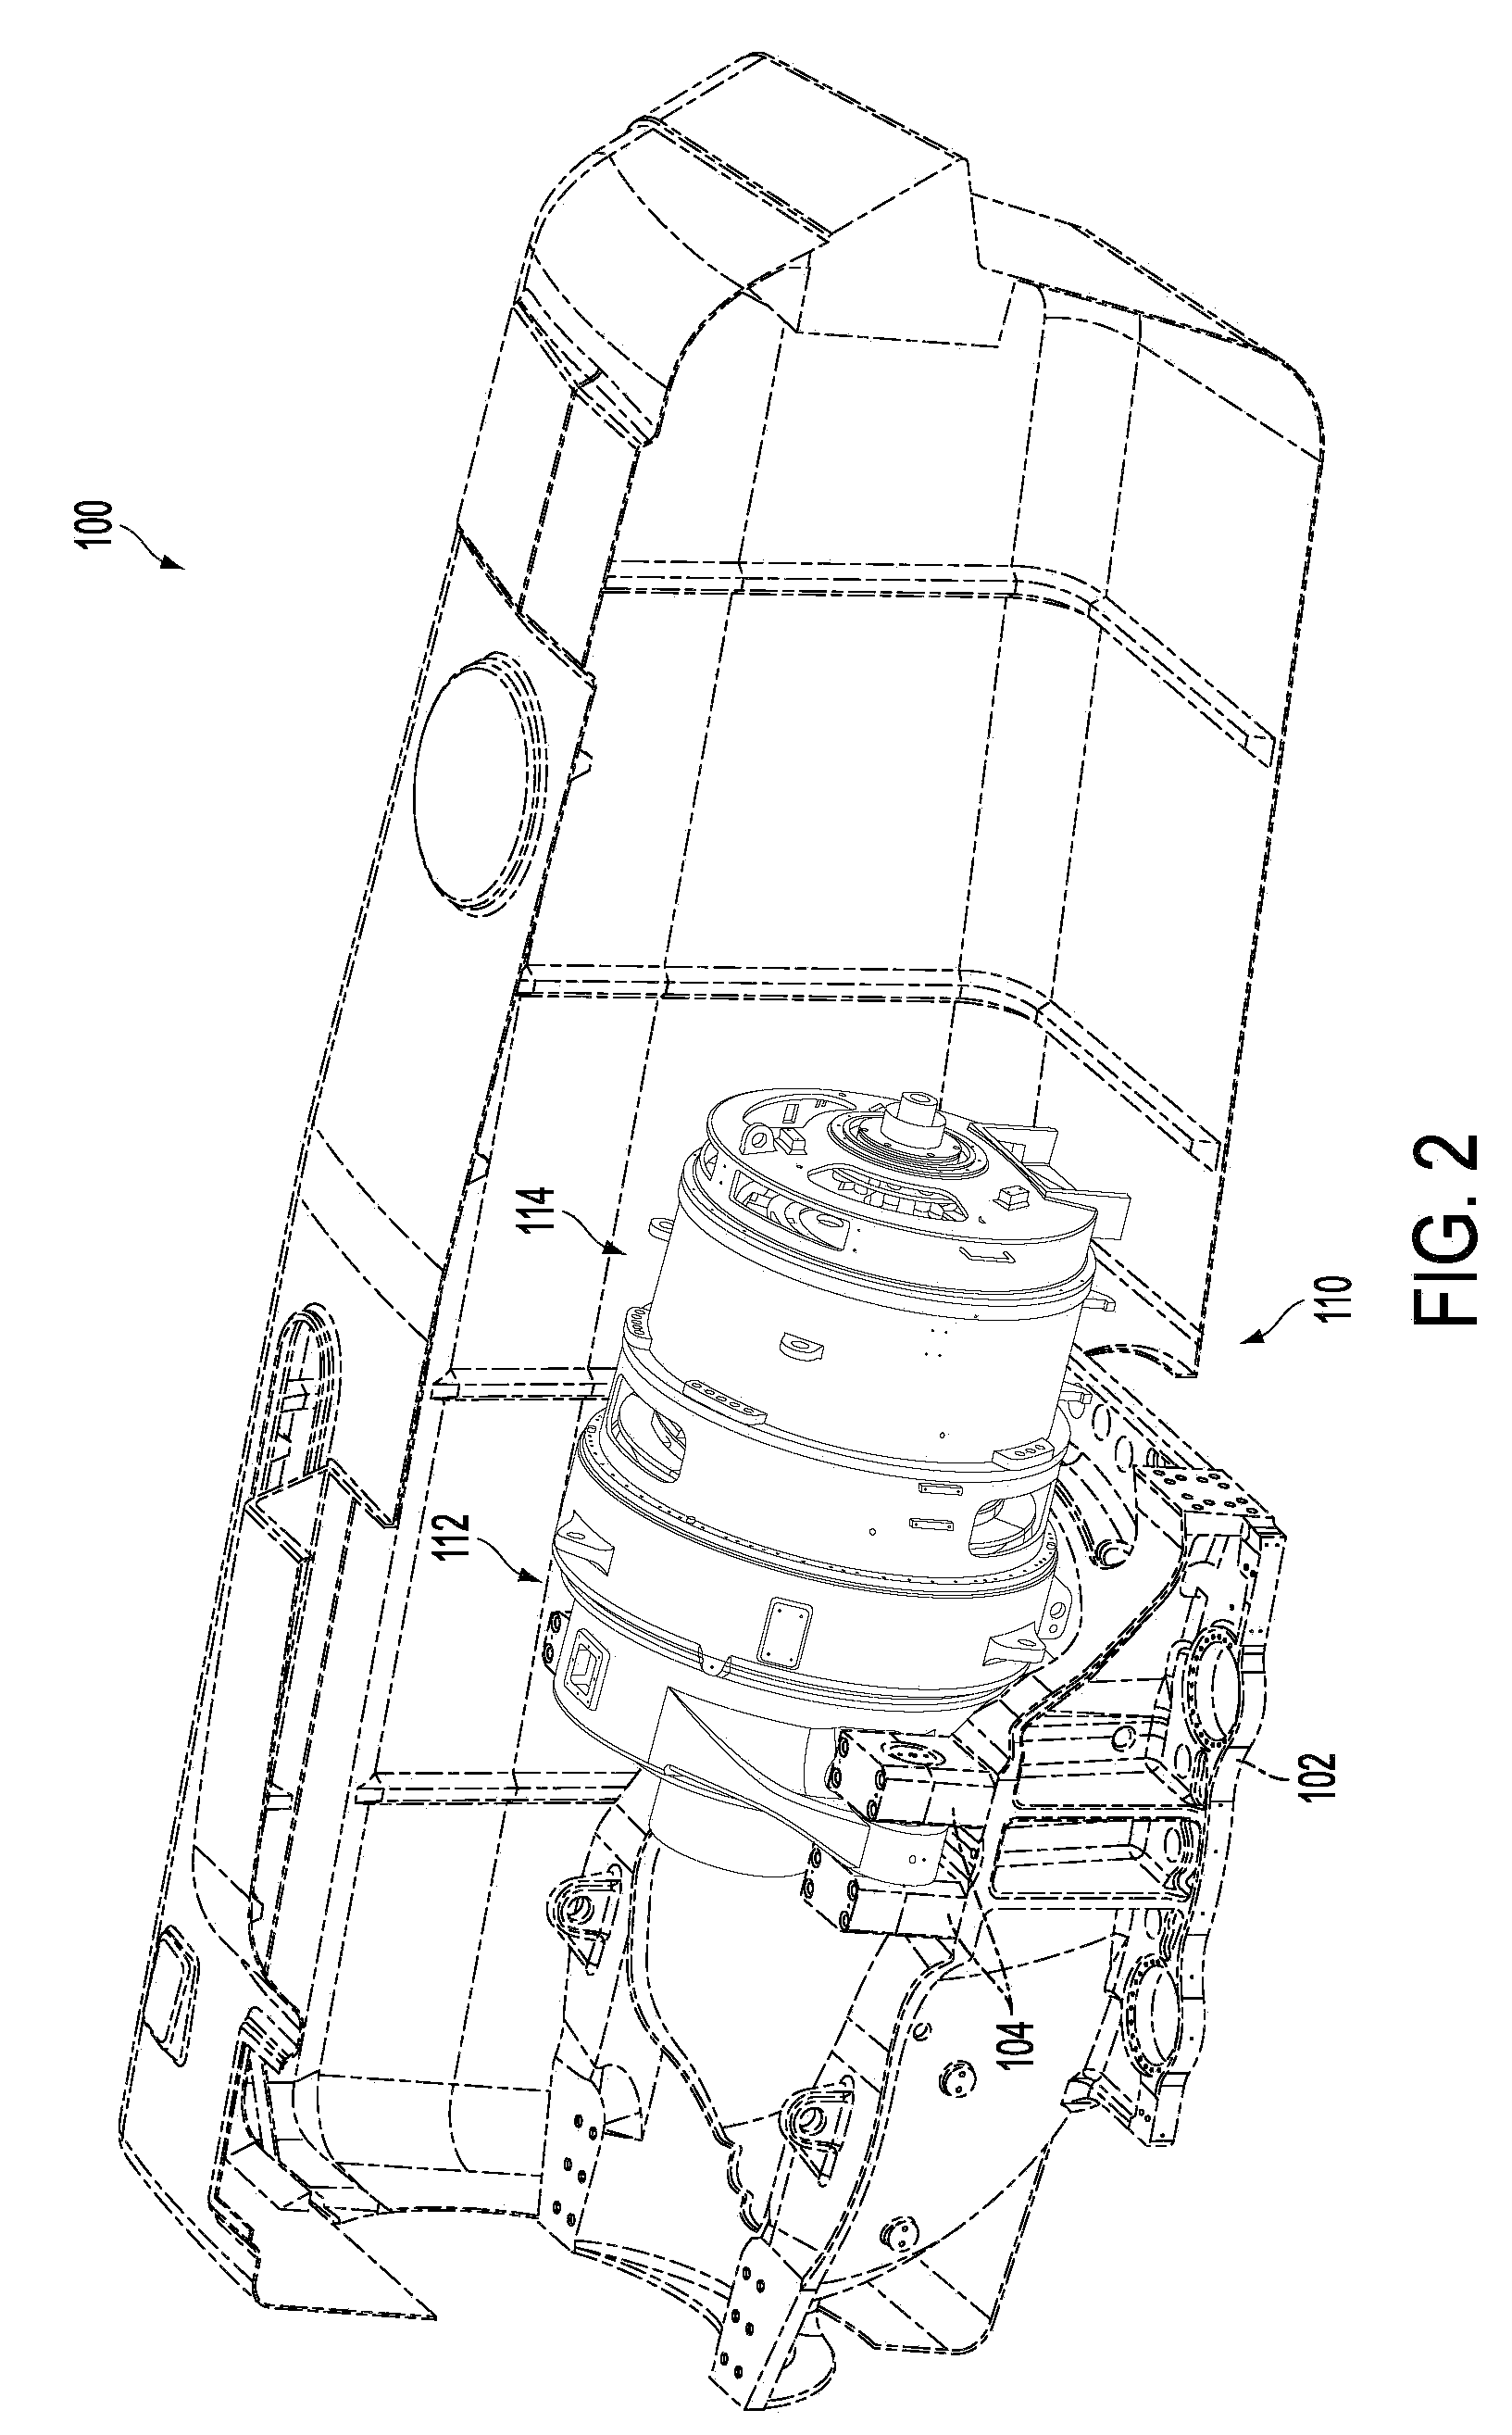 System and assembly for power transmission and generation in a wind turbine